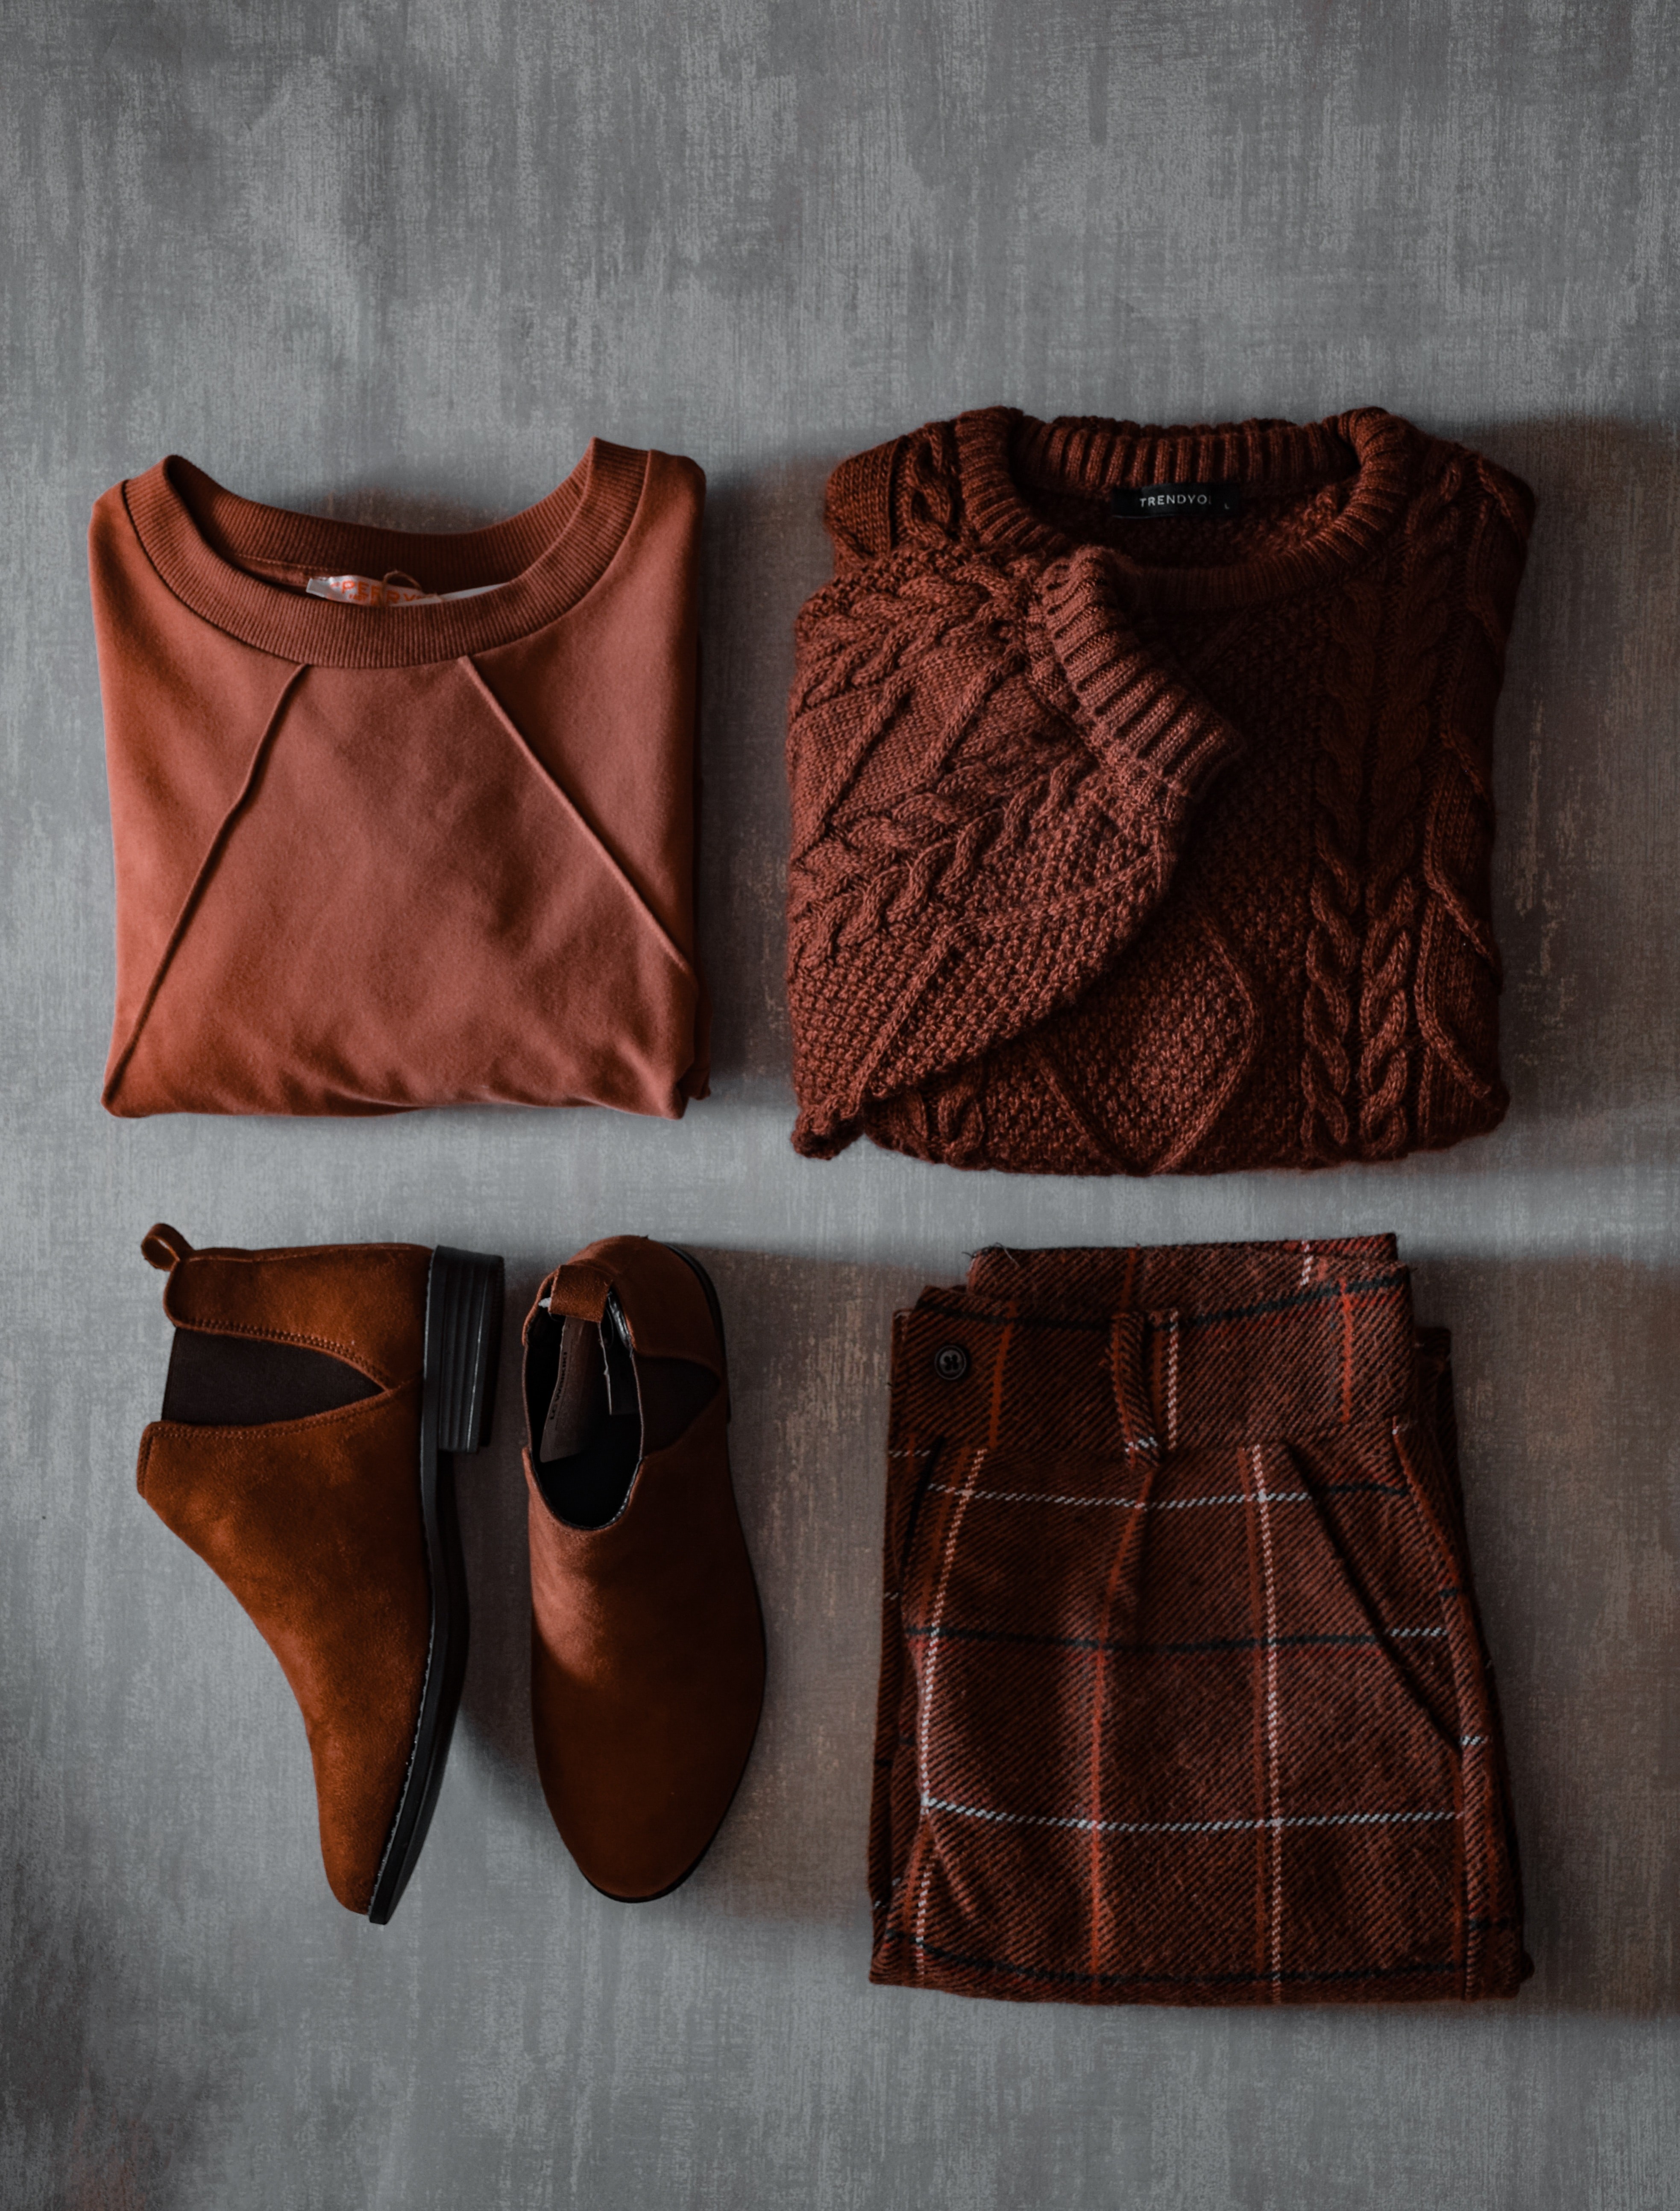 20 Clothing Items To Thrift For Your Fall Capsule Wardrobe - Brit + Co